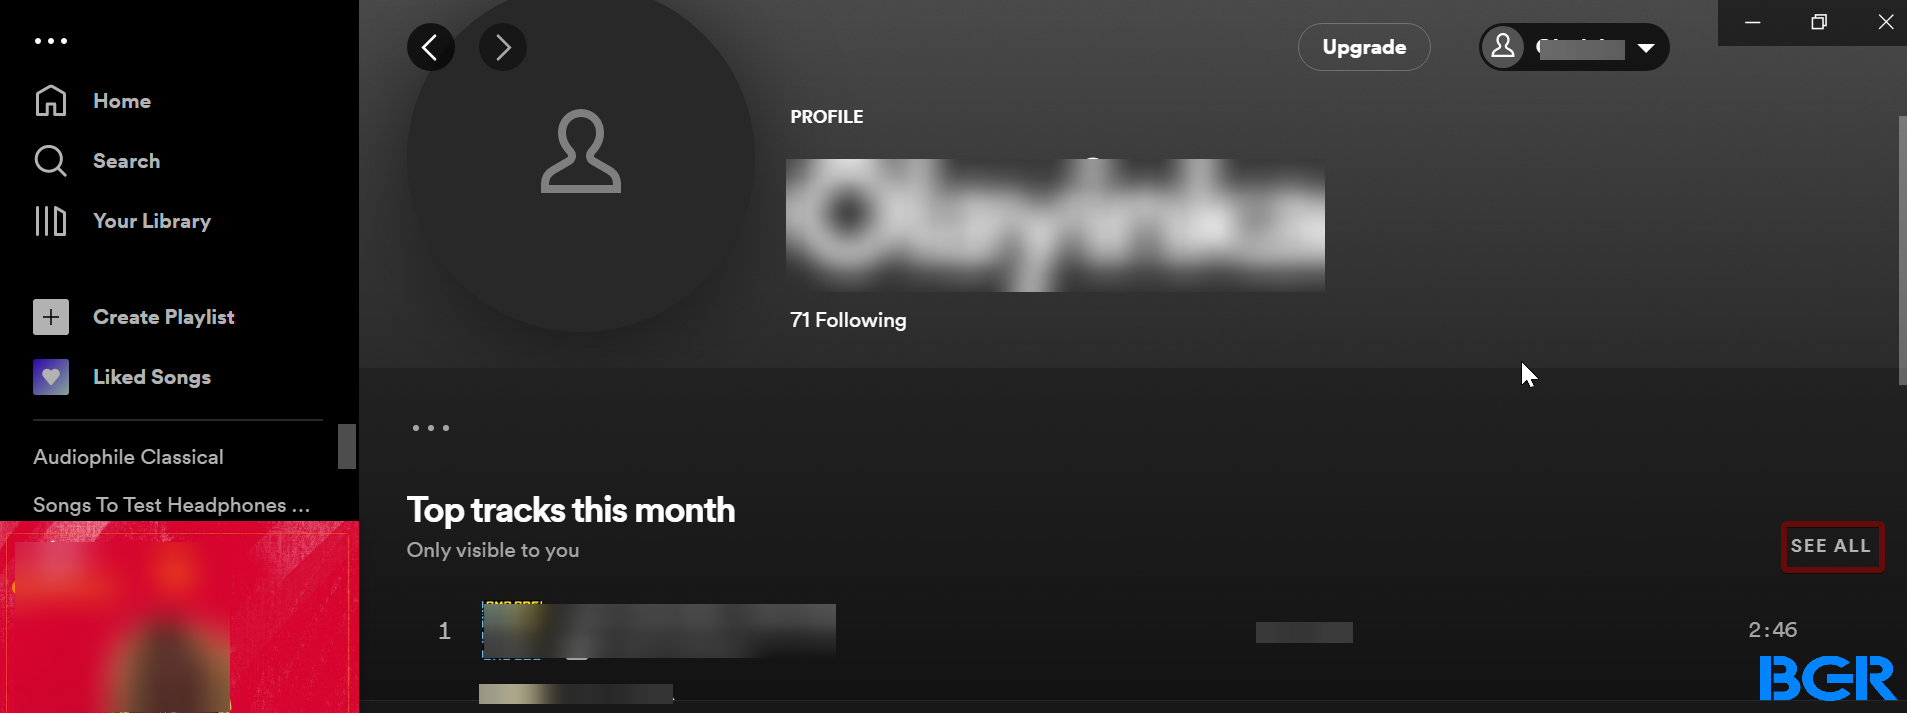 Spotify stats- Top songs of the month. 